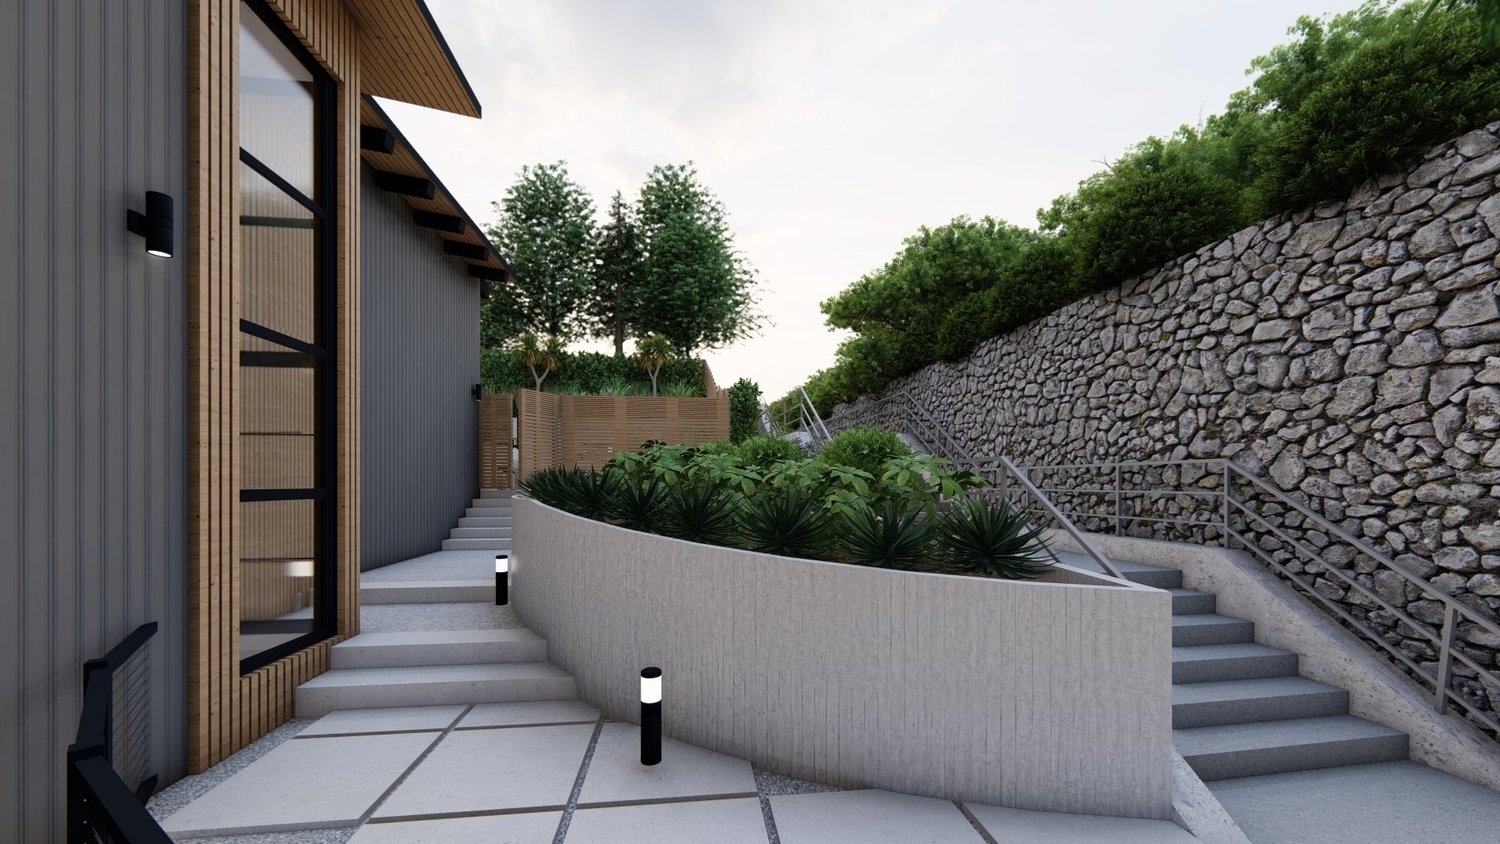 San Francisco side yard with stone terrace retaining wall with plants, and concrete stairways